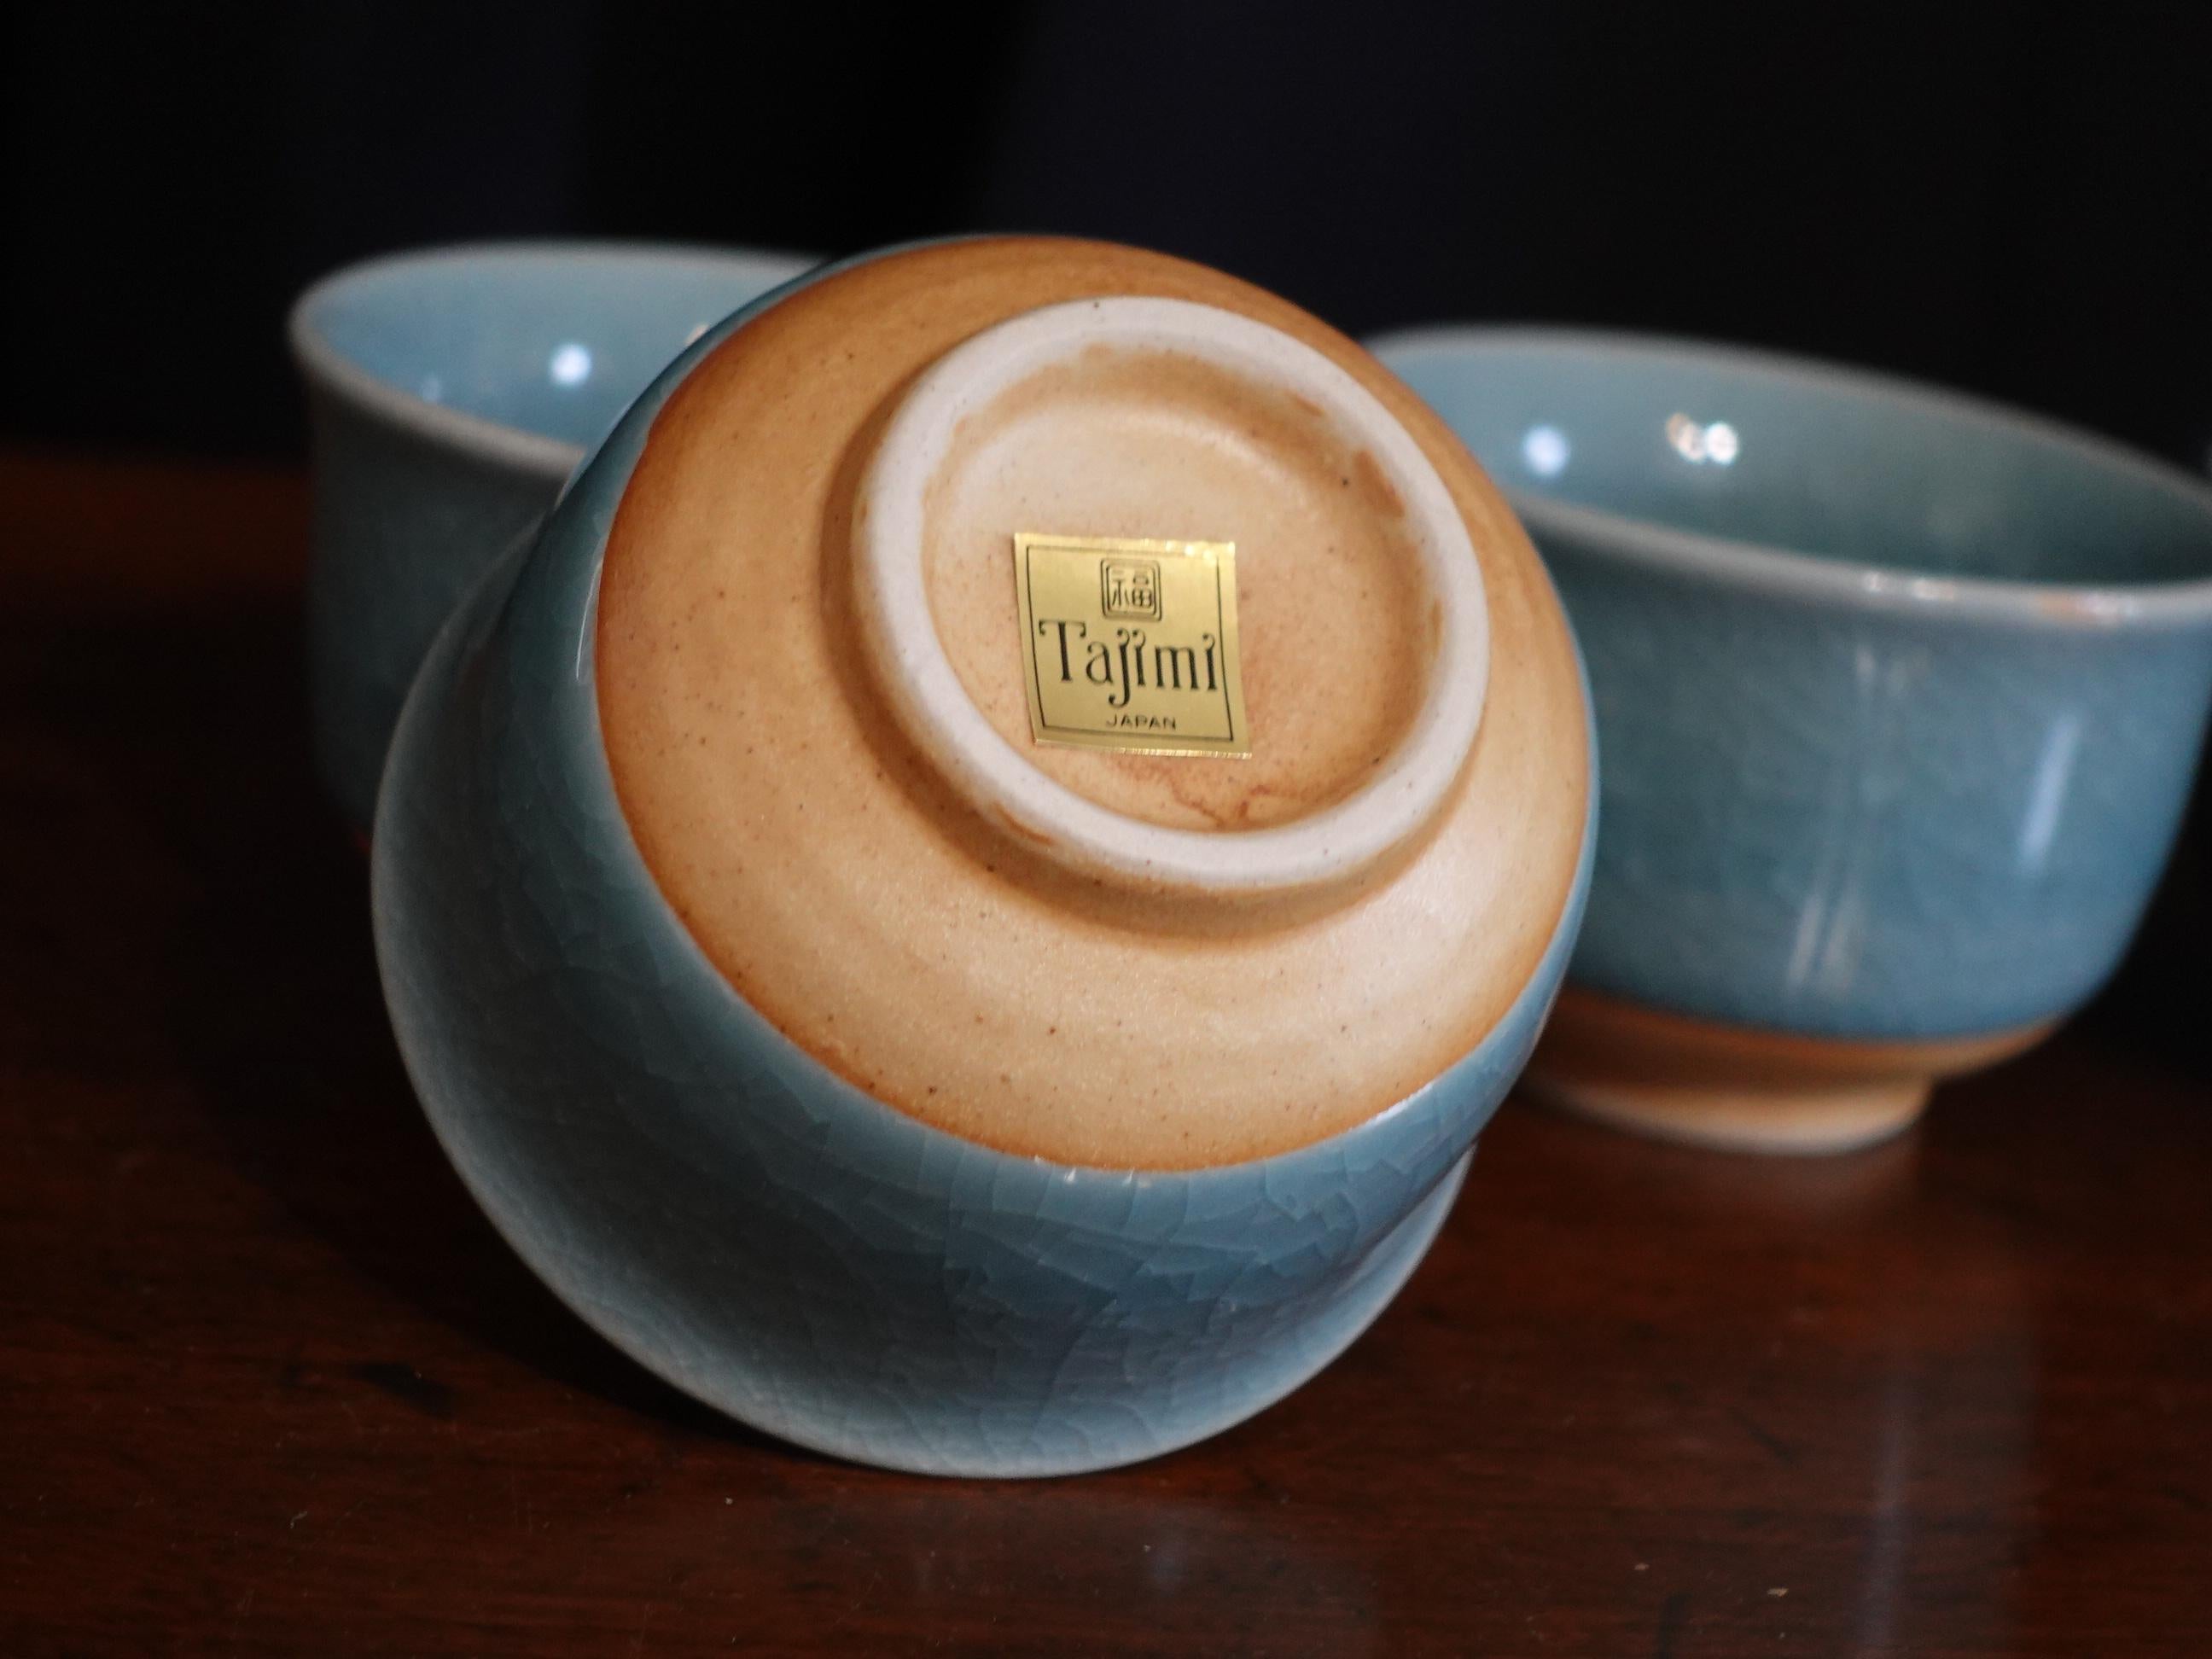 Old, Set of 5 Japanese Tajimi Tea Cups In Excellent Condition For Sale In Norton, MA